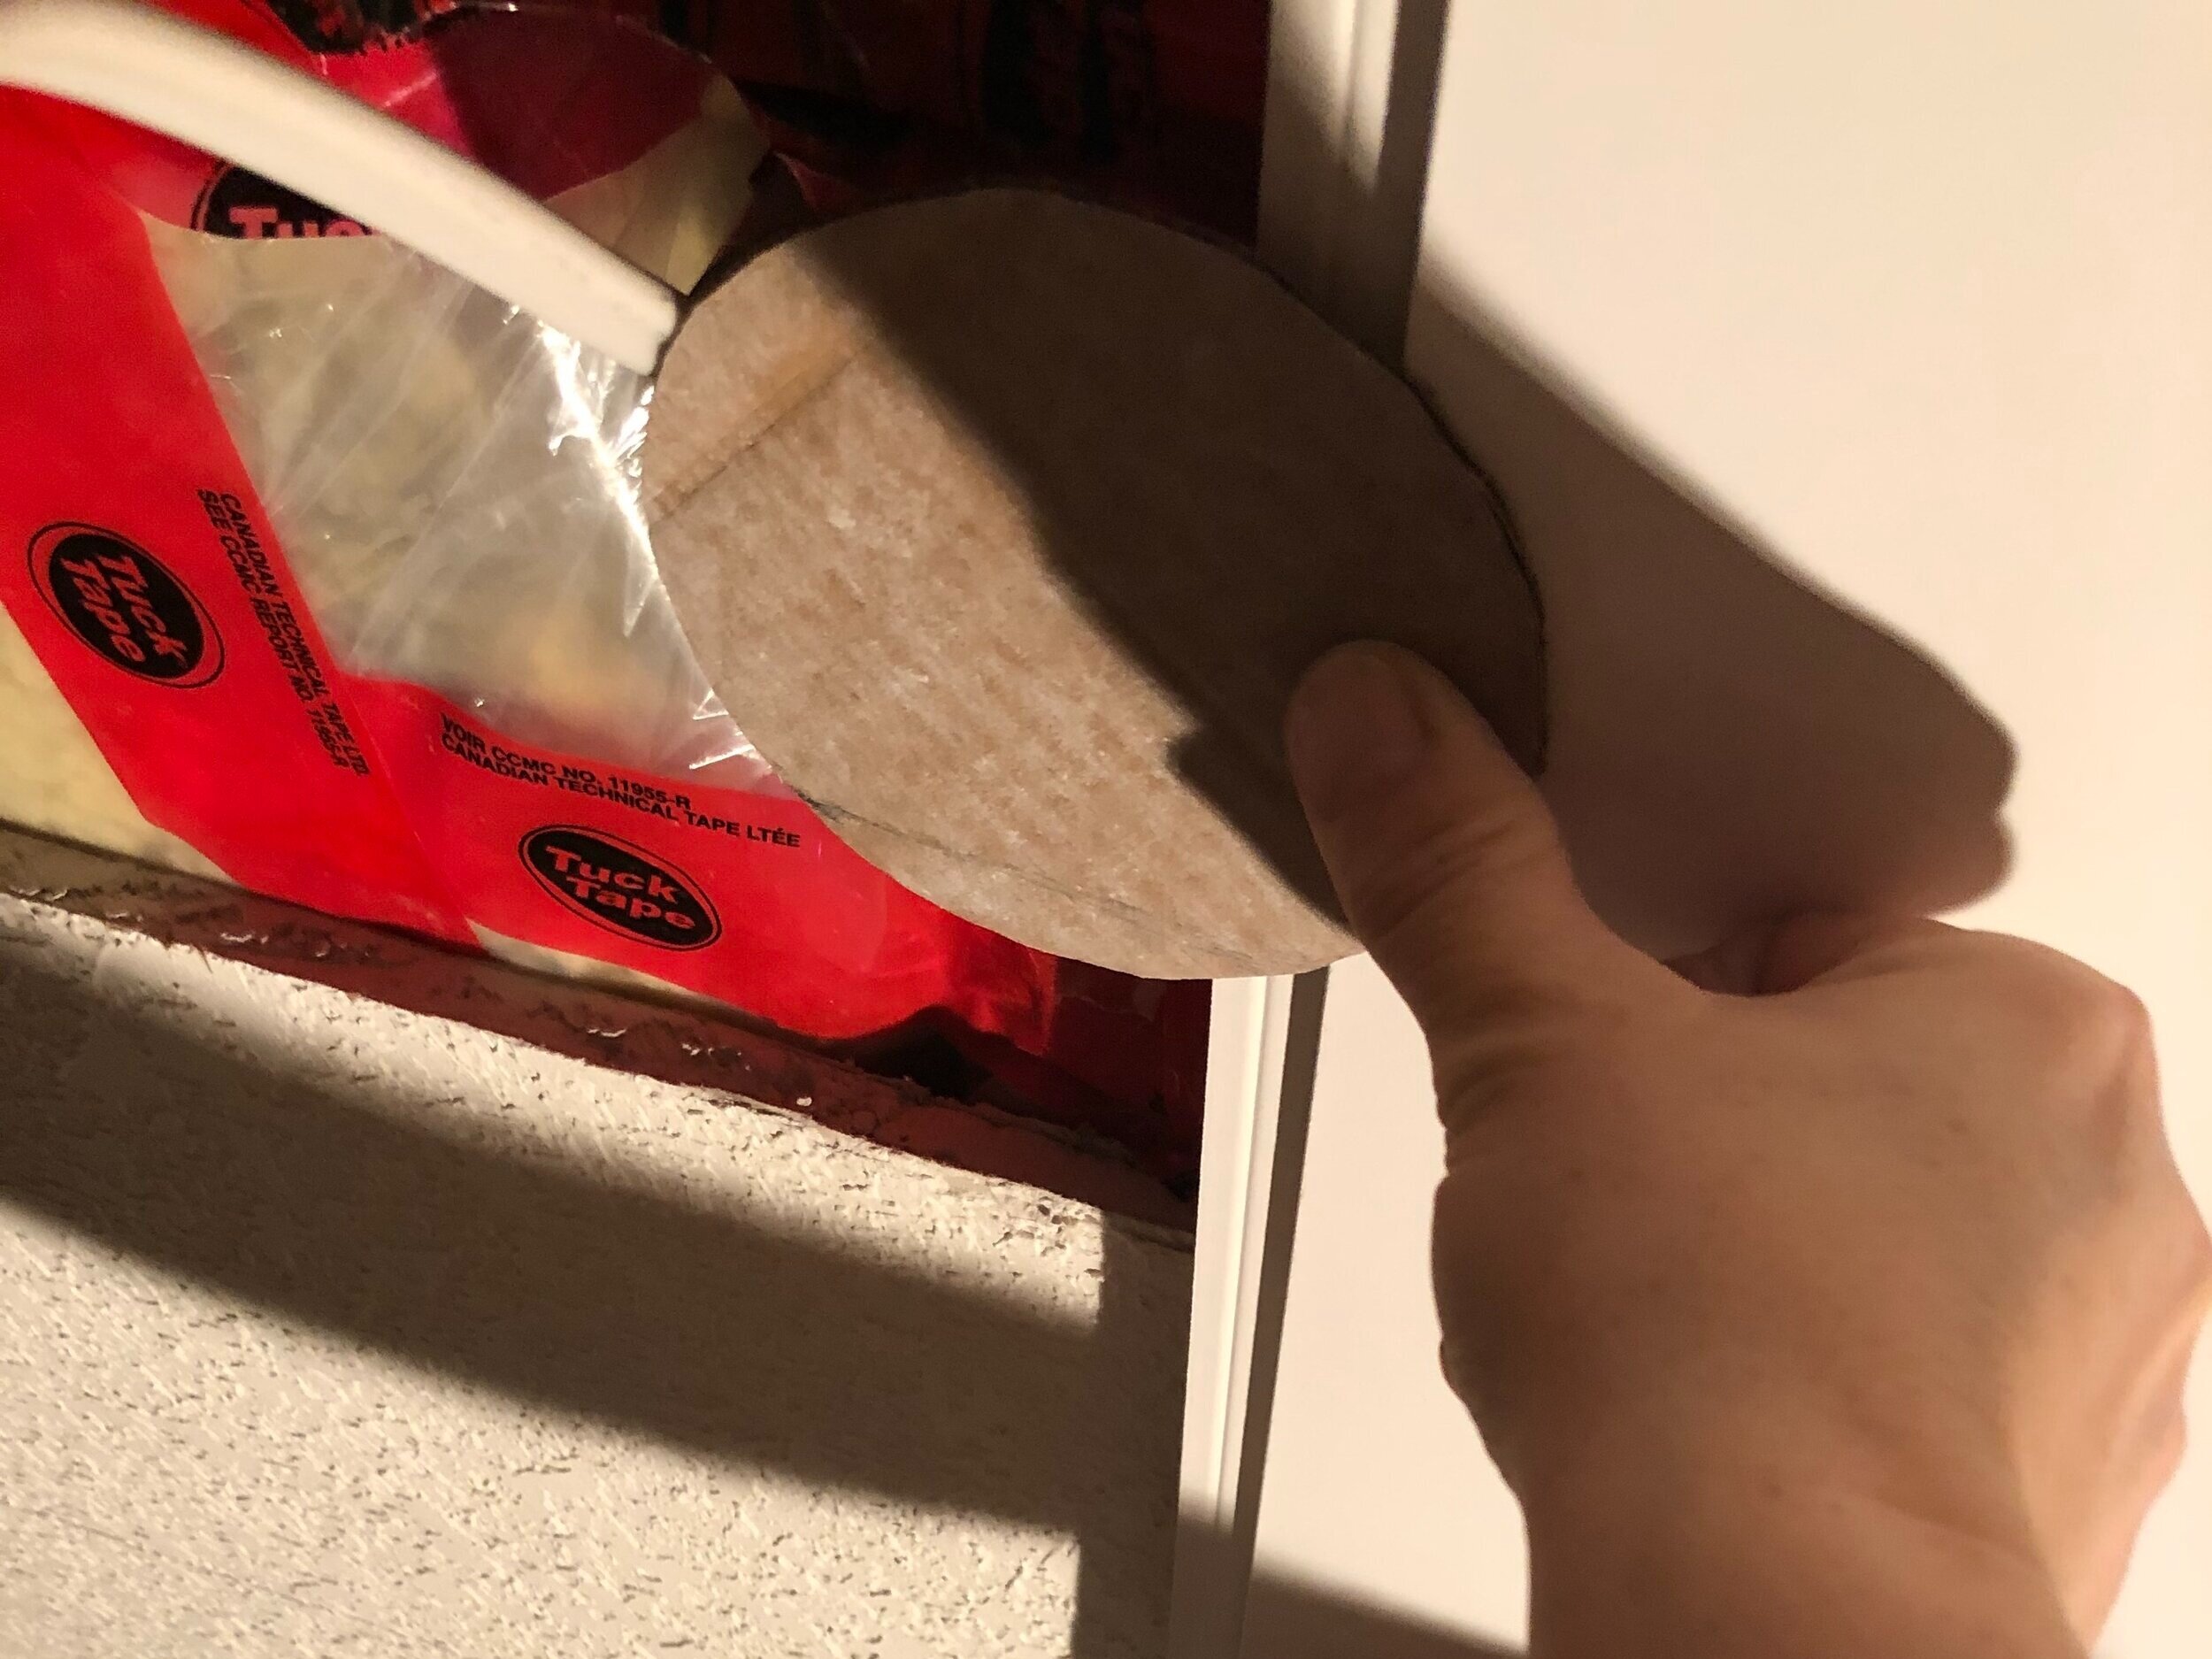 holding the cardboard template up to the board to mark a spot for a hole for a light